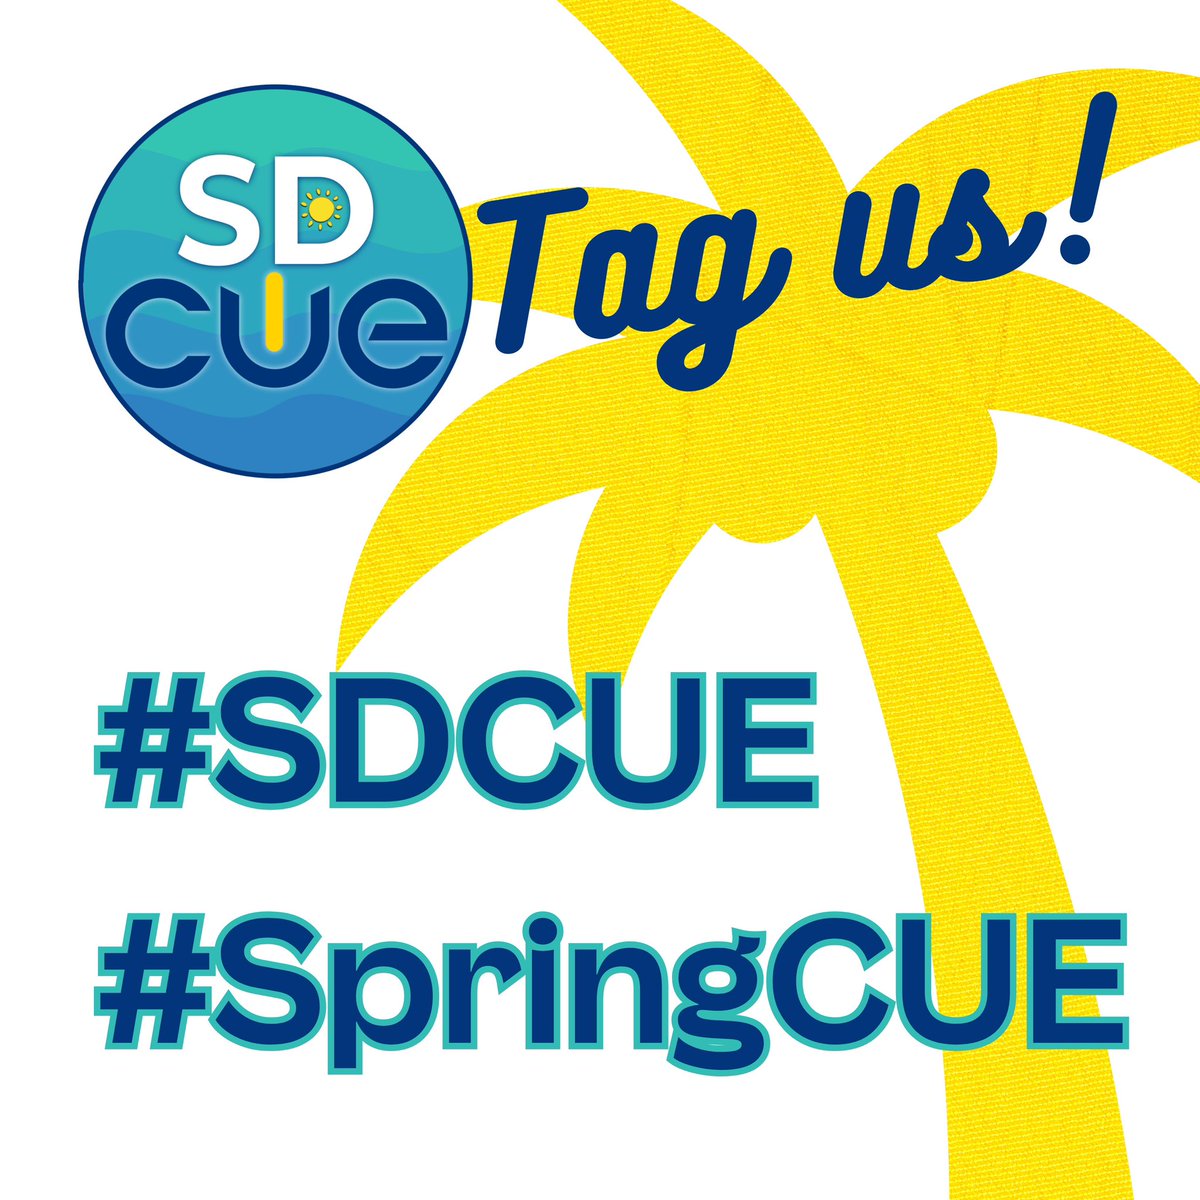 We can’t wait to see your photos and videos! Be sure to tag us @sandiego_cue and use the hashtags #SDCUE and #SpringCUE @sandiego_cue #SpringCUE #SDCUE #CUEmmunity